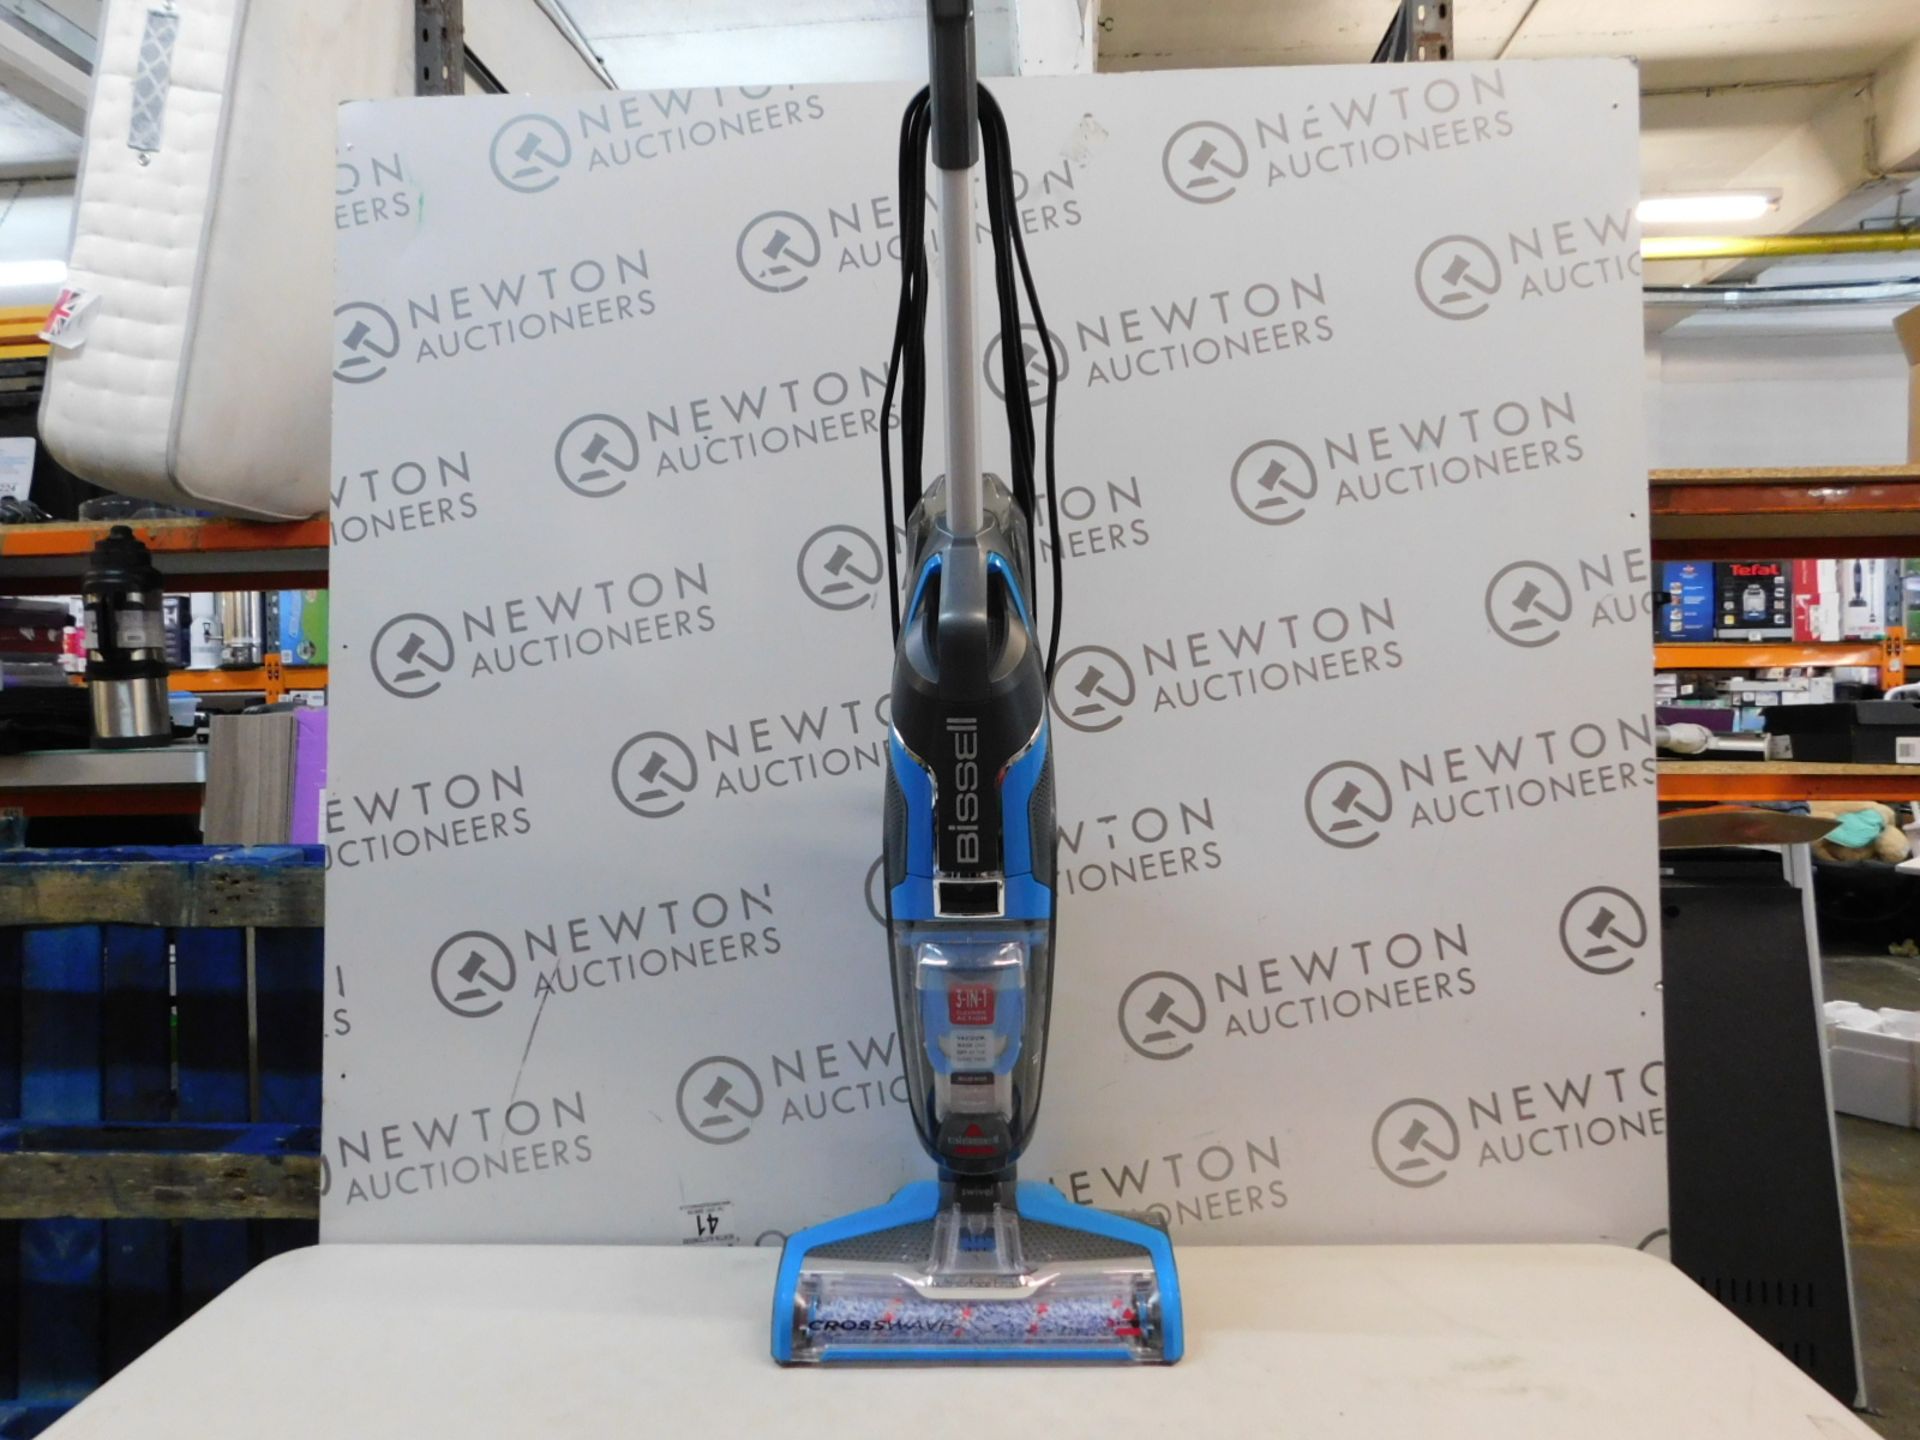 1 BISSELL CROSSWAVE ALL IN ONE MULTI-SURFACE CLEANING SYSTEM RRP Â£249.99